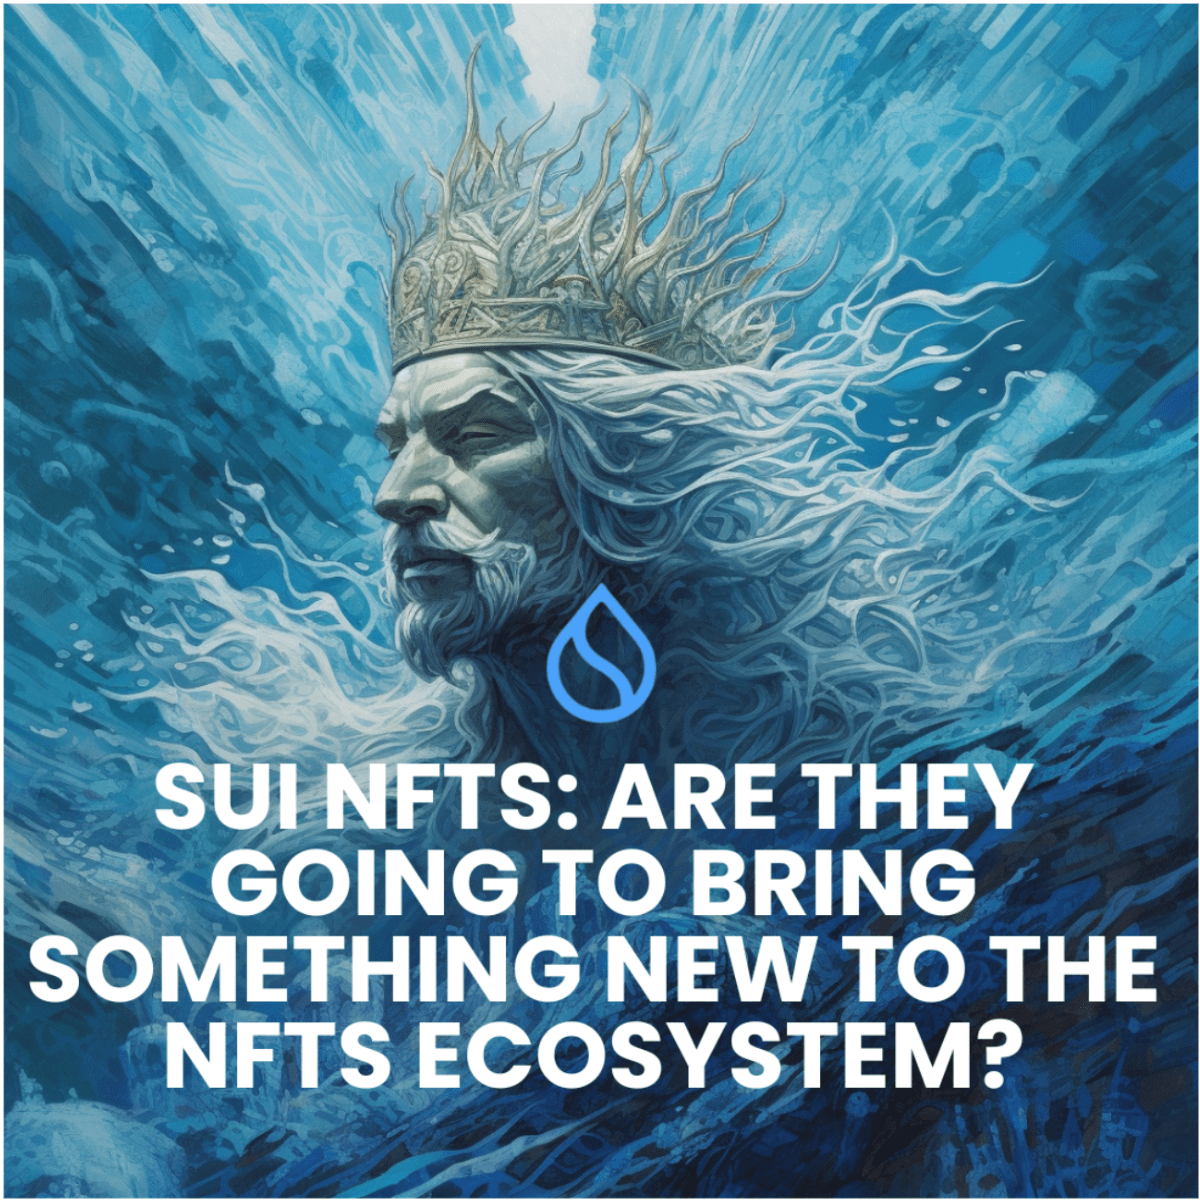 SUI NFTS: ARE THEY GOING TO BRING SOMETHING NEW TO THE NFTS ECOSYSTEM?